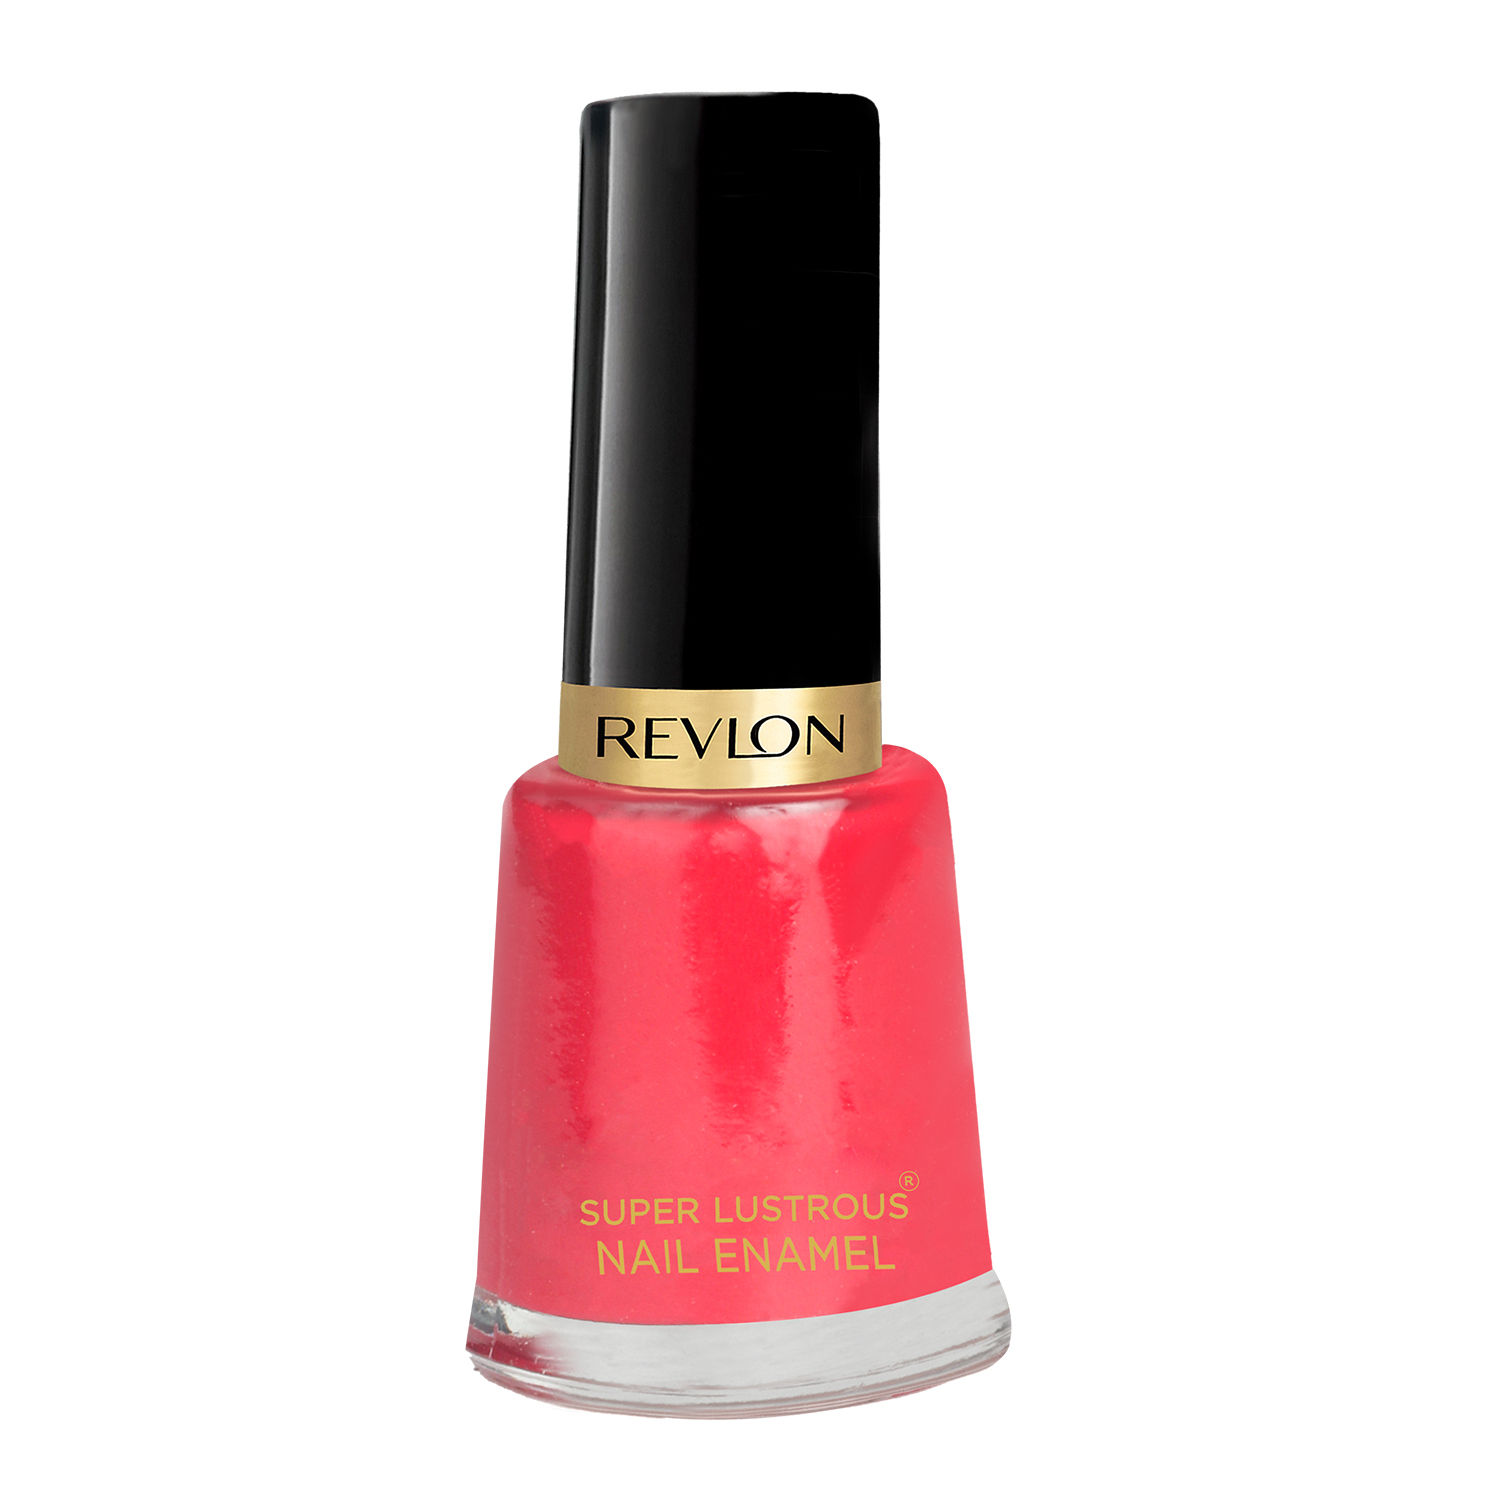 Girly by Revlon Nail Polish Review | Valentine's Day Nails | Style on Main